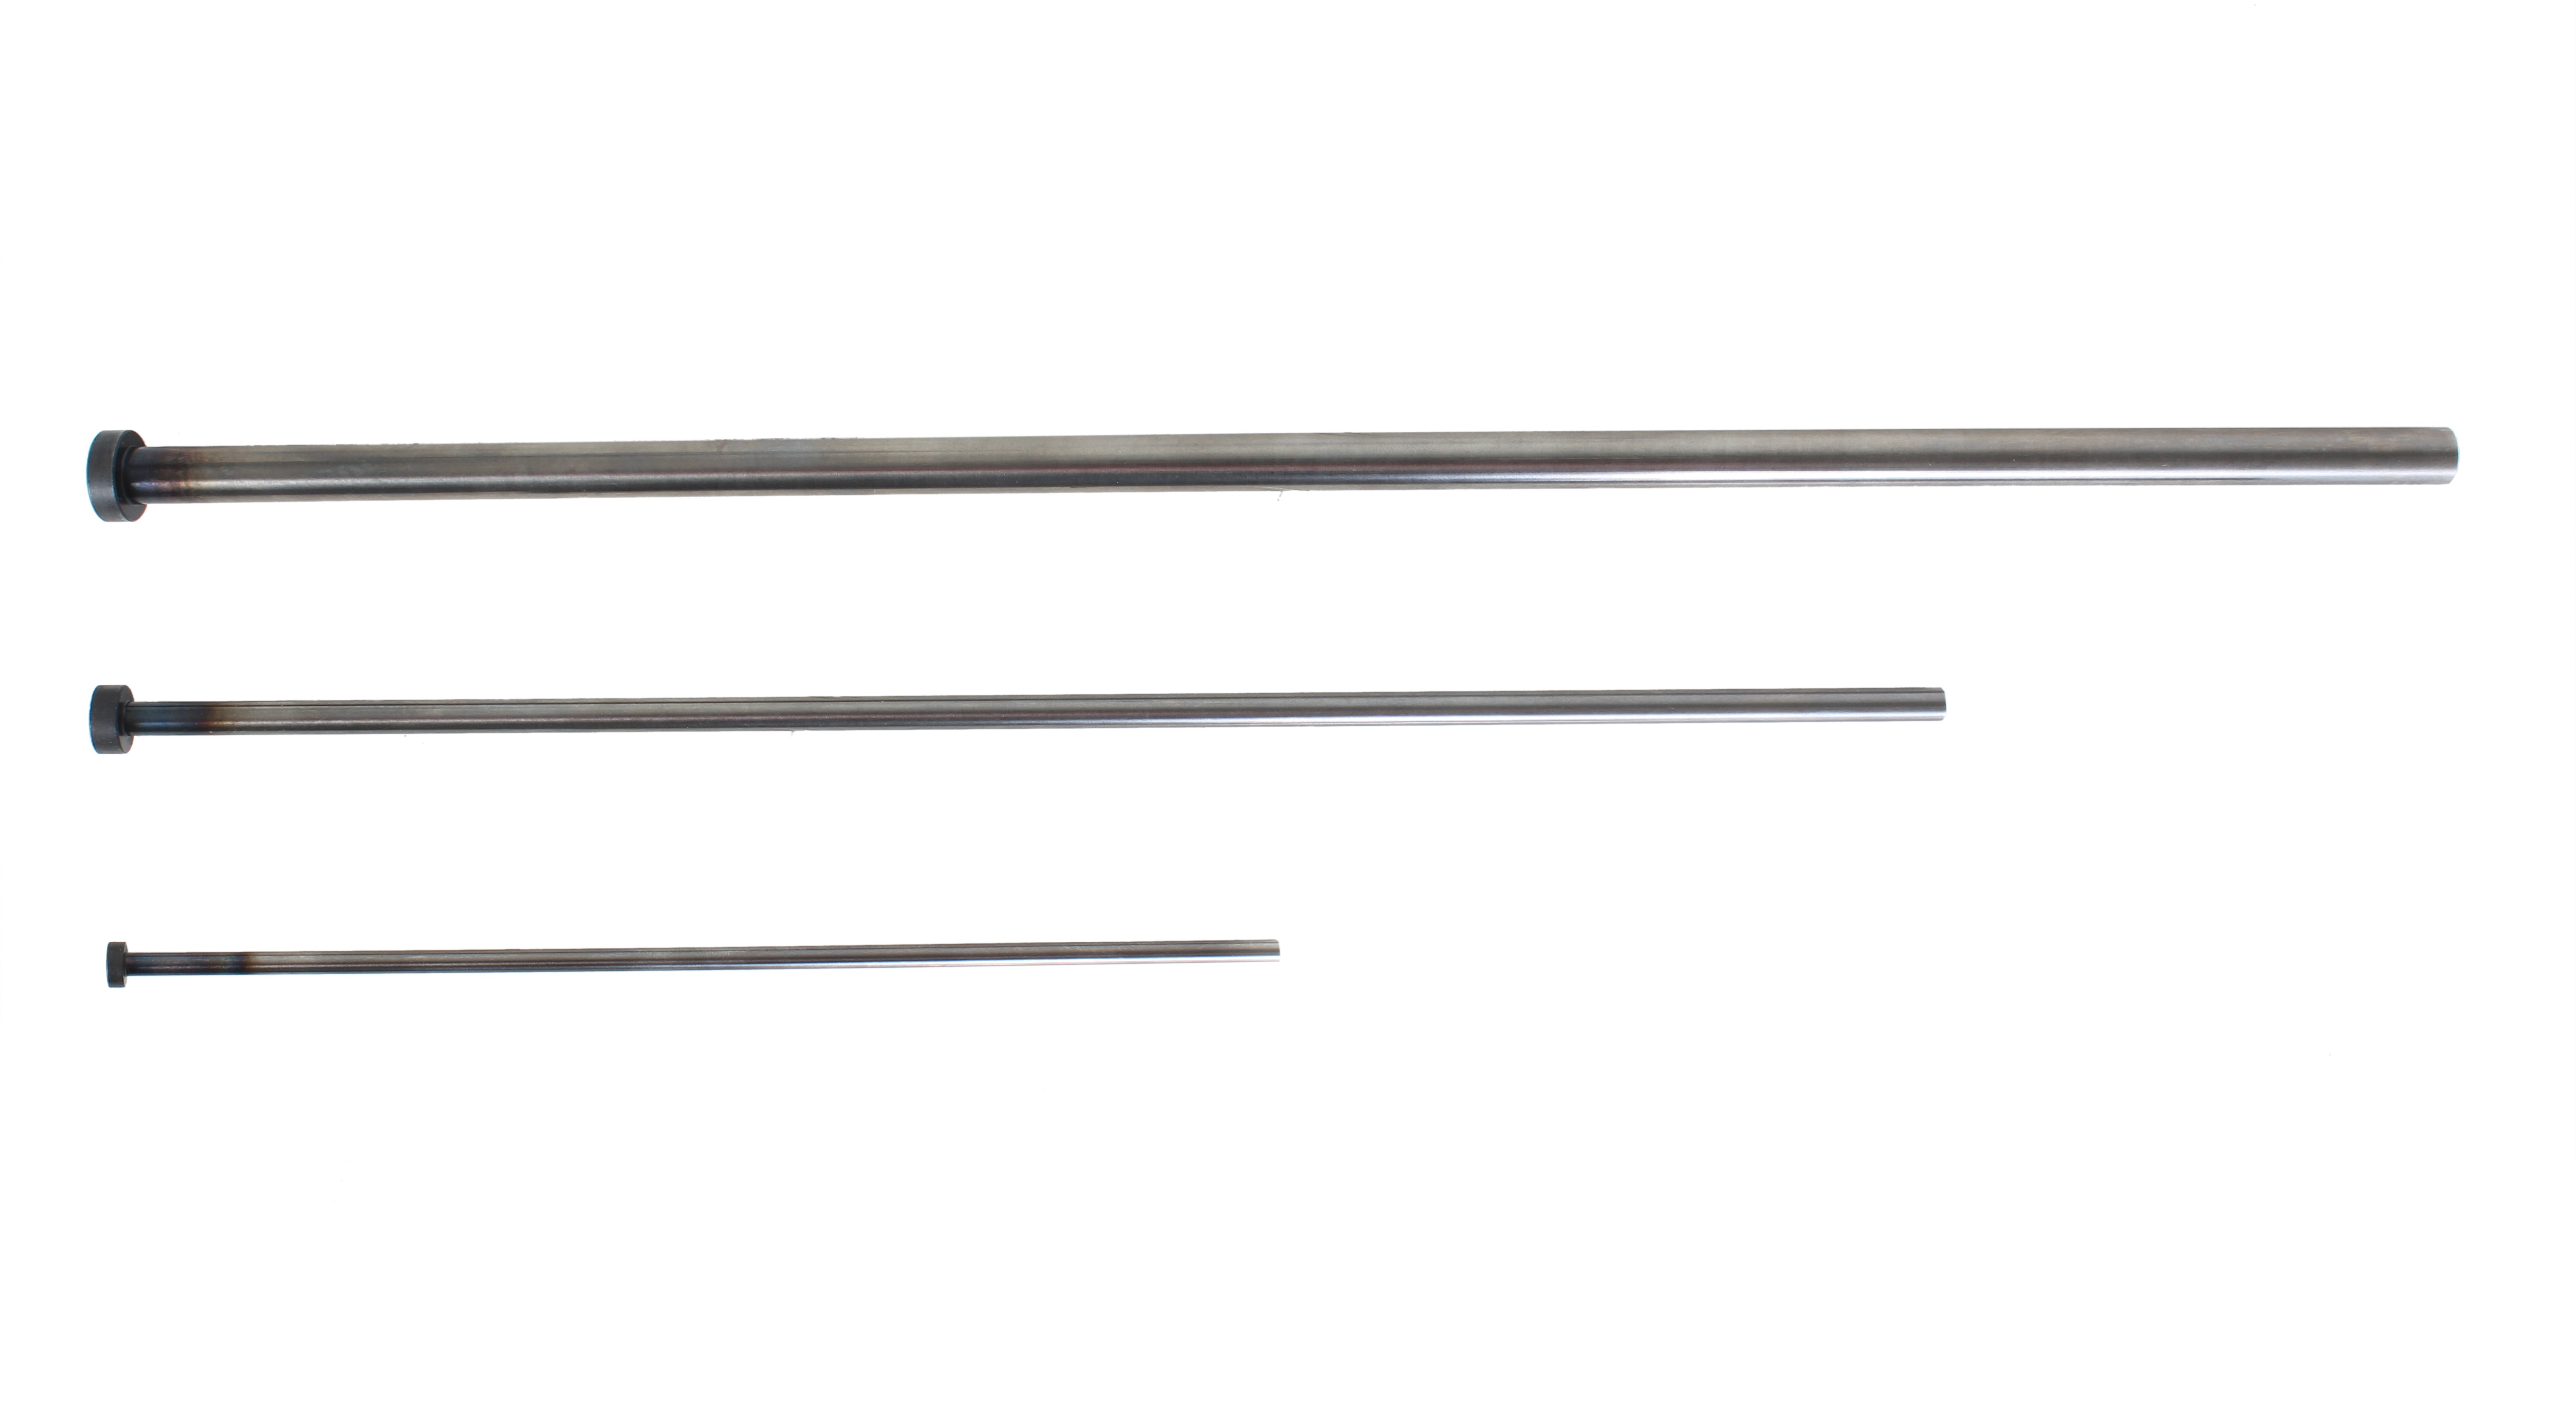 STRAIGHT EJECTOR PINS -DIN Type/SKD61 equivalent+Nitrided/Standard- (D-EPN18-400) 